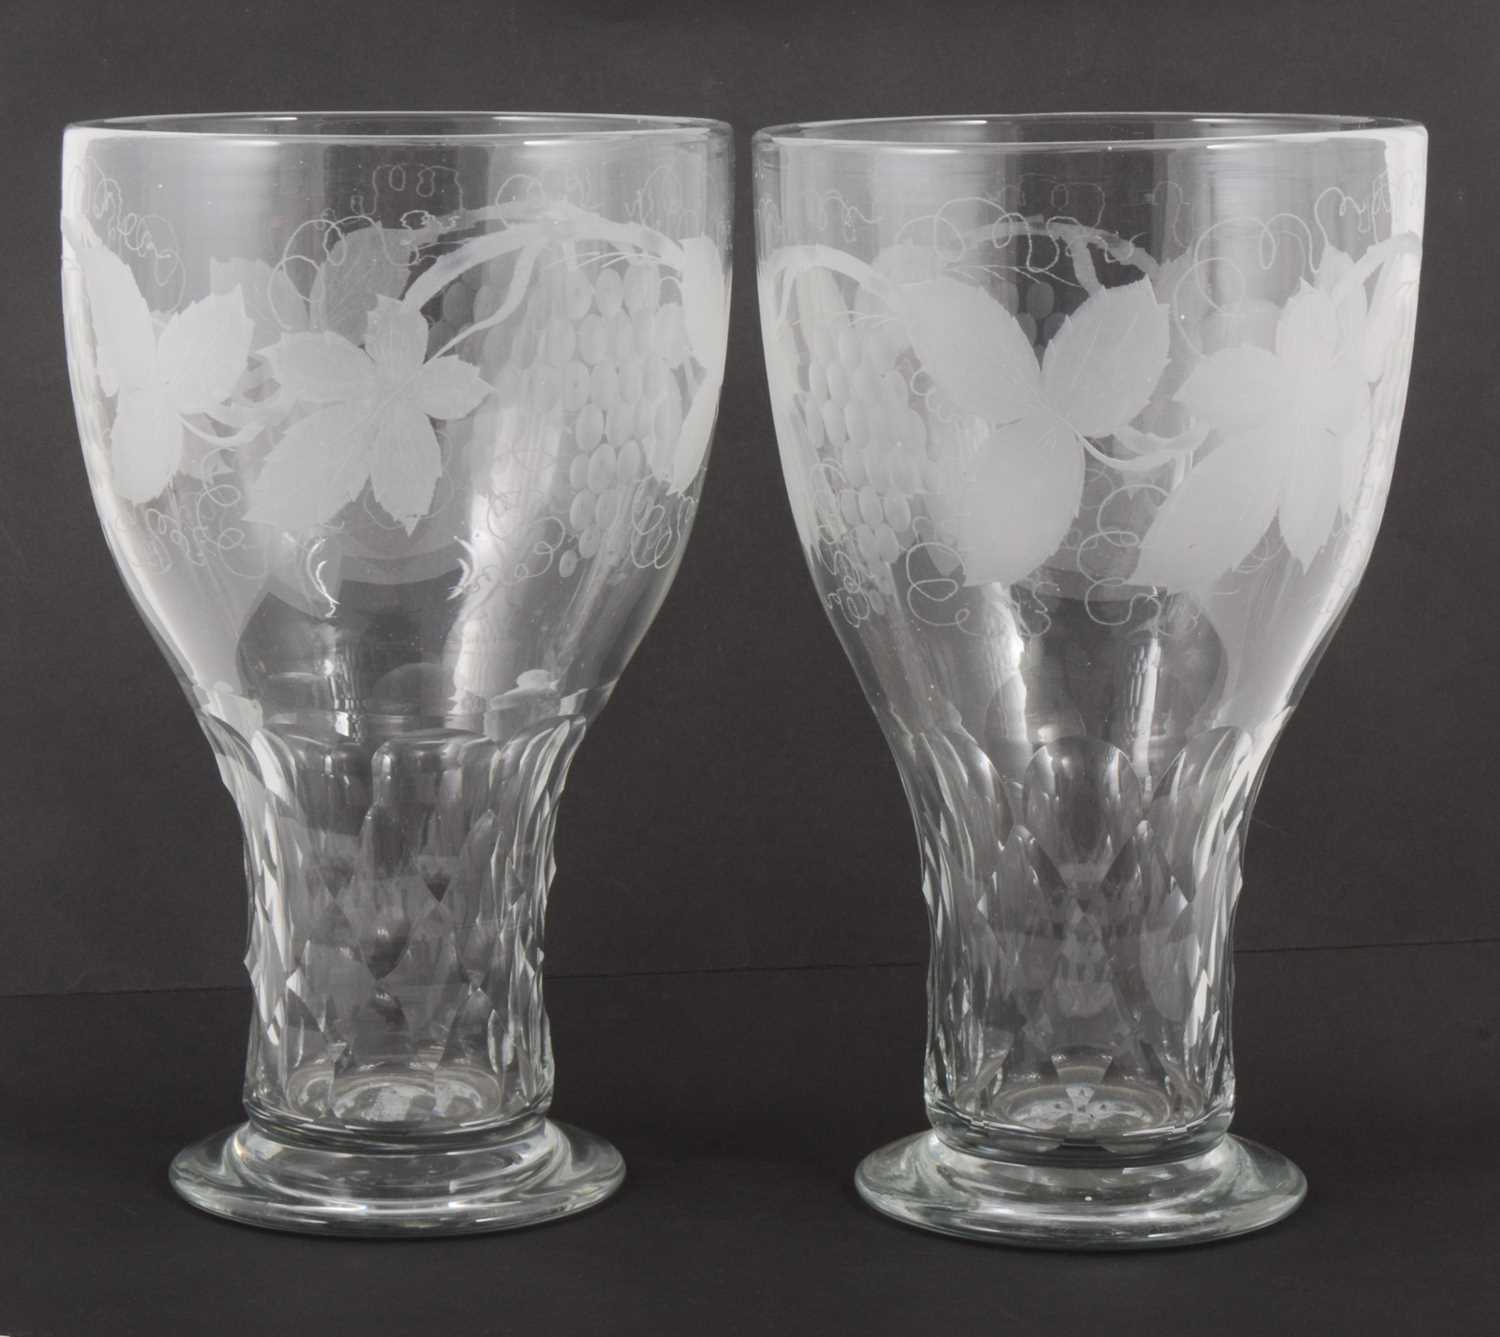 Lot 62 - A pair of oversized cut glass goblet-shaped